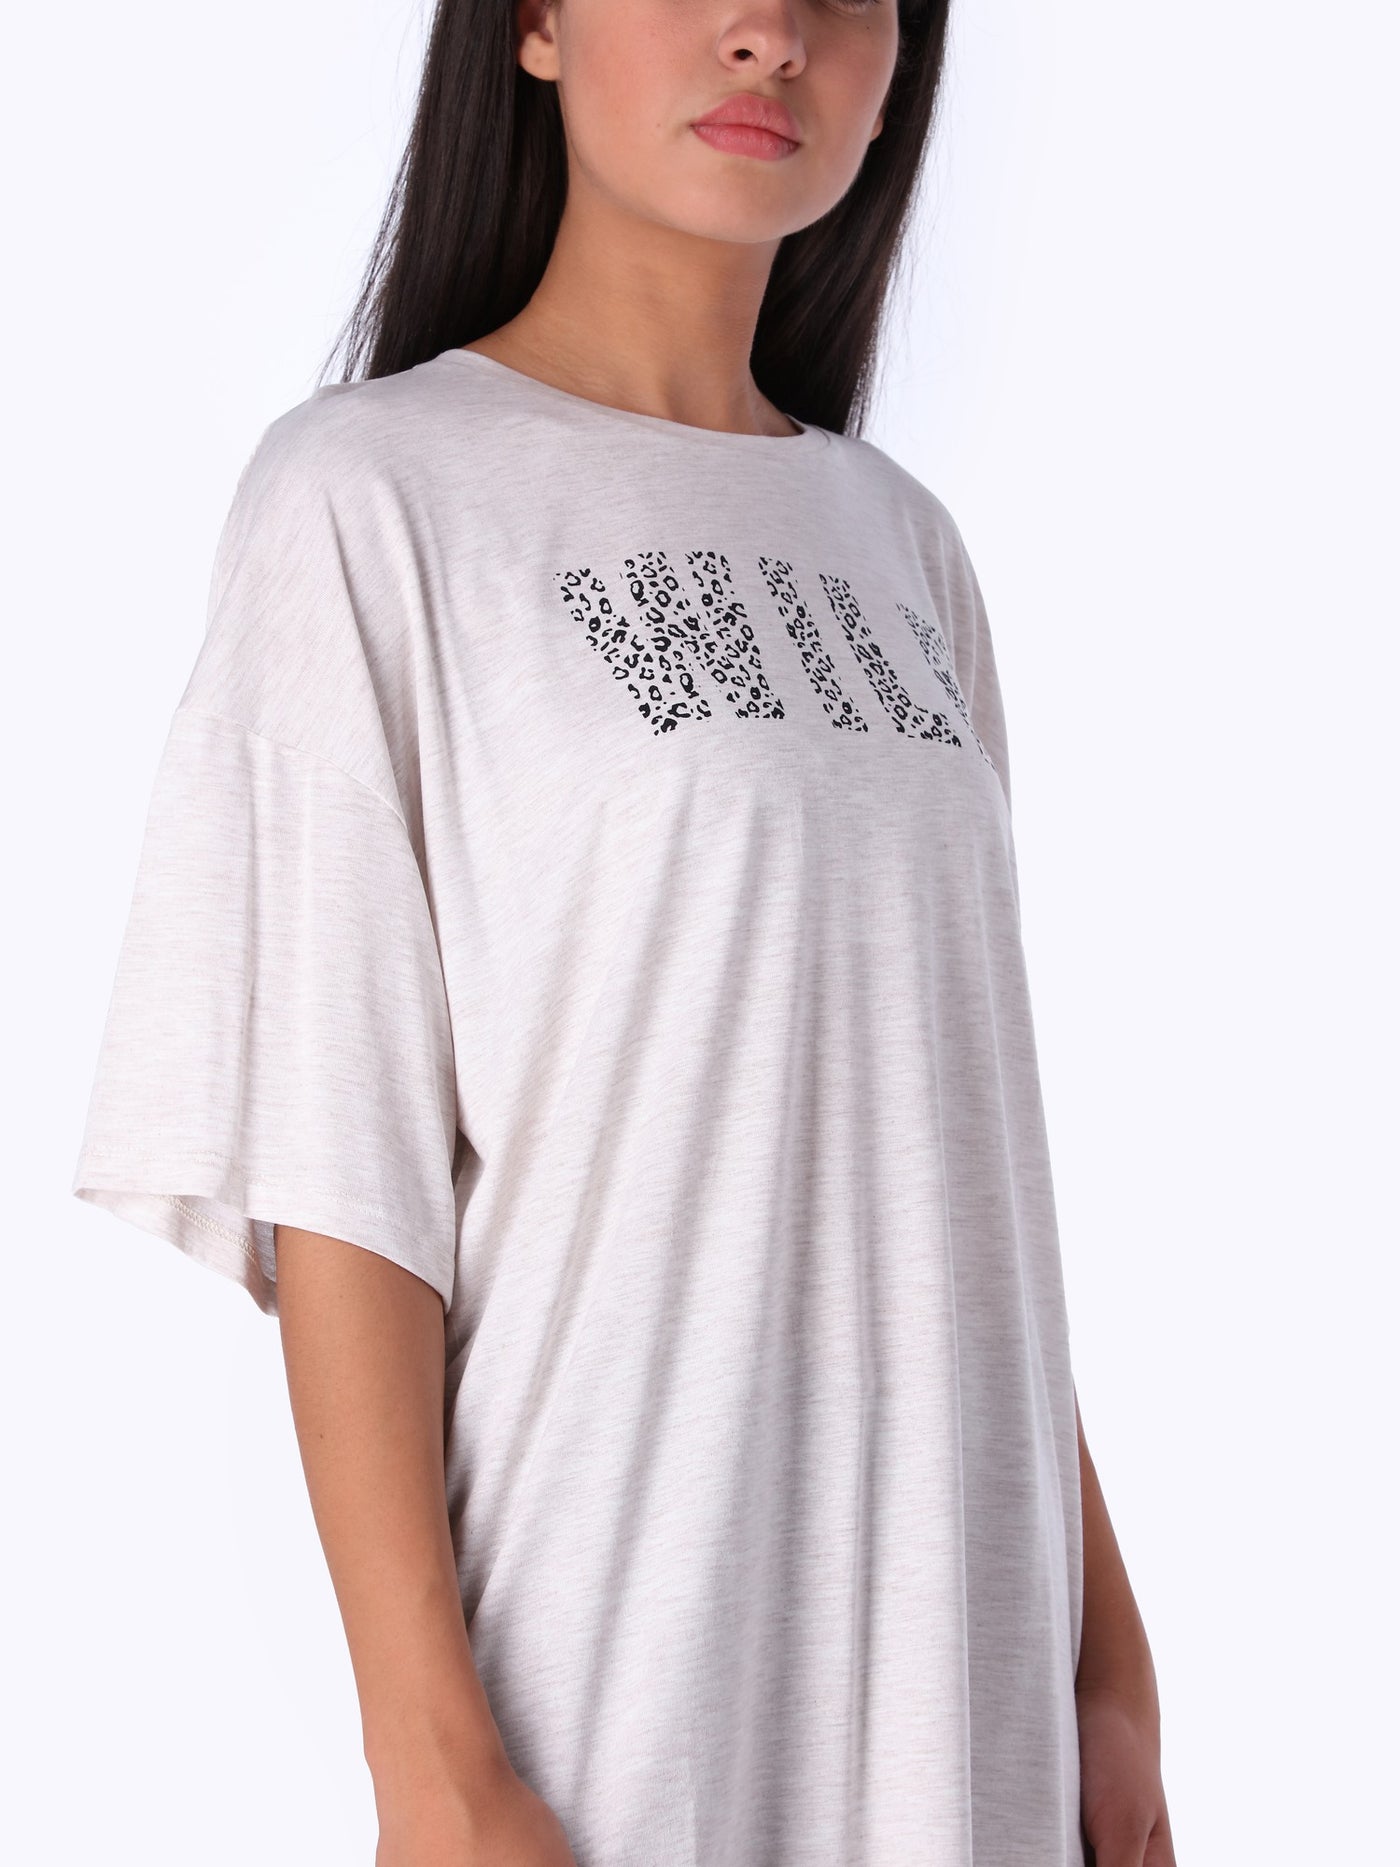 OR Women's Front Print Oversized T-Shirt